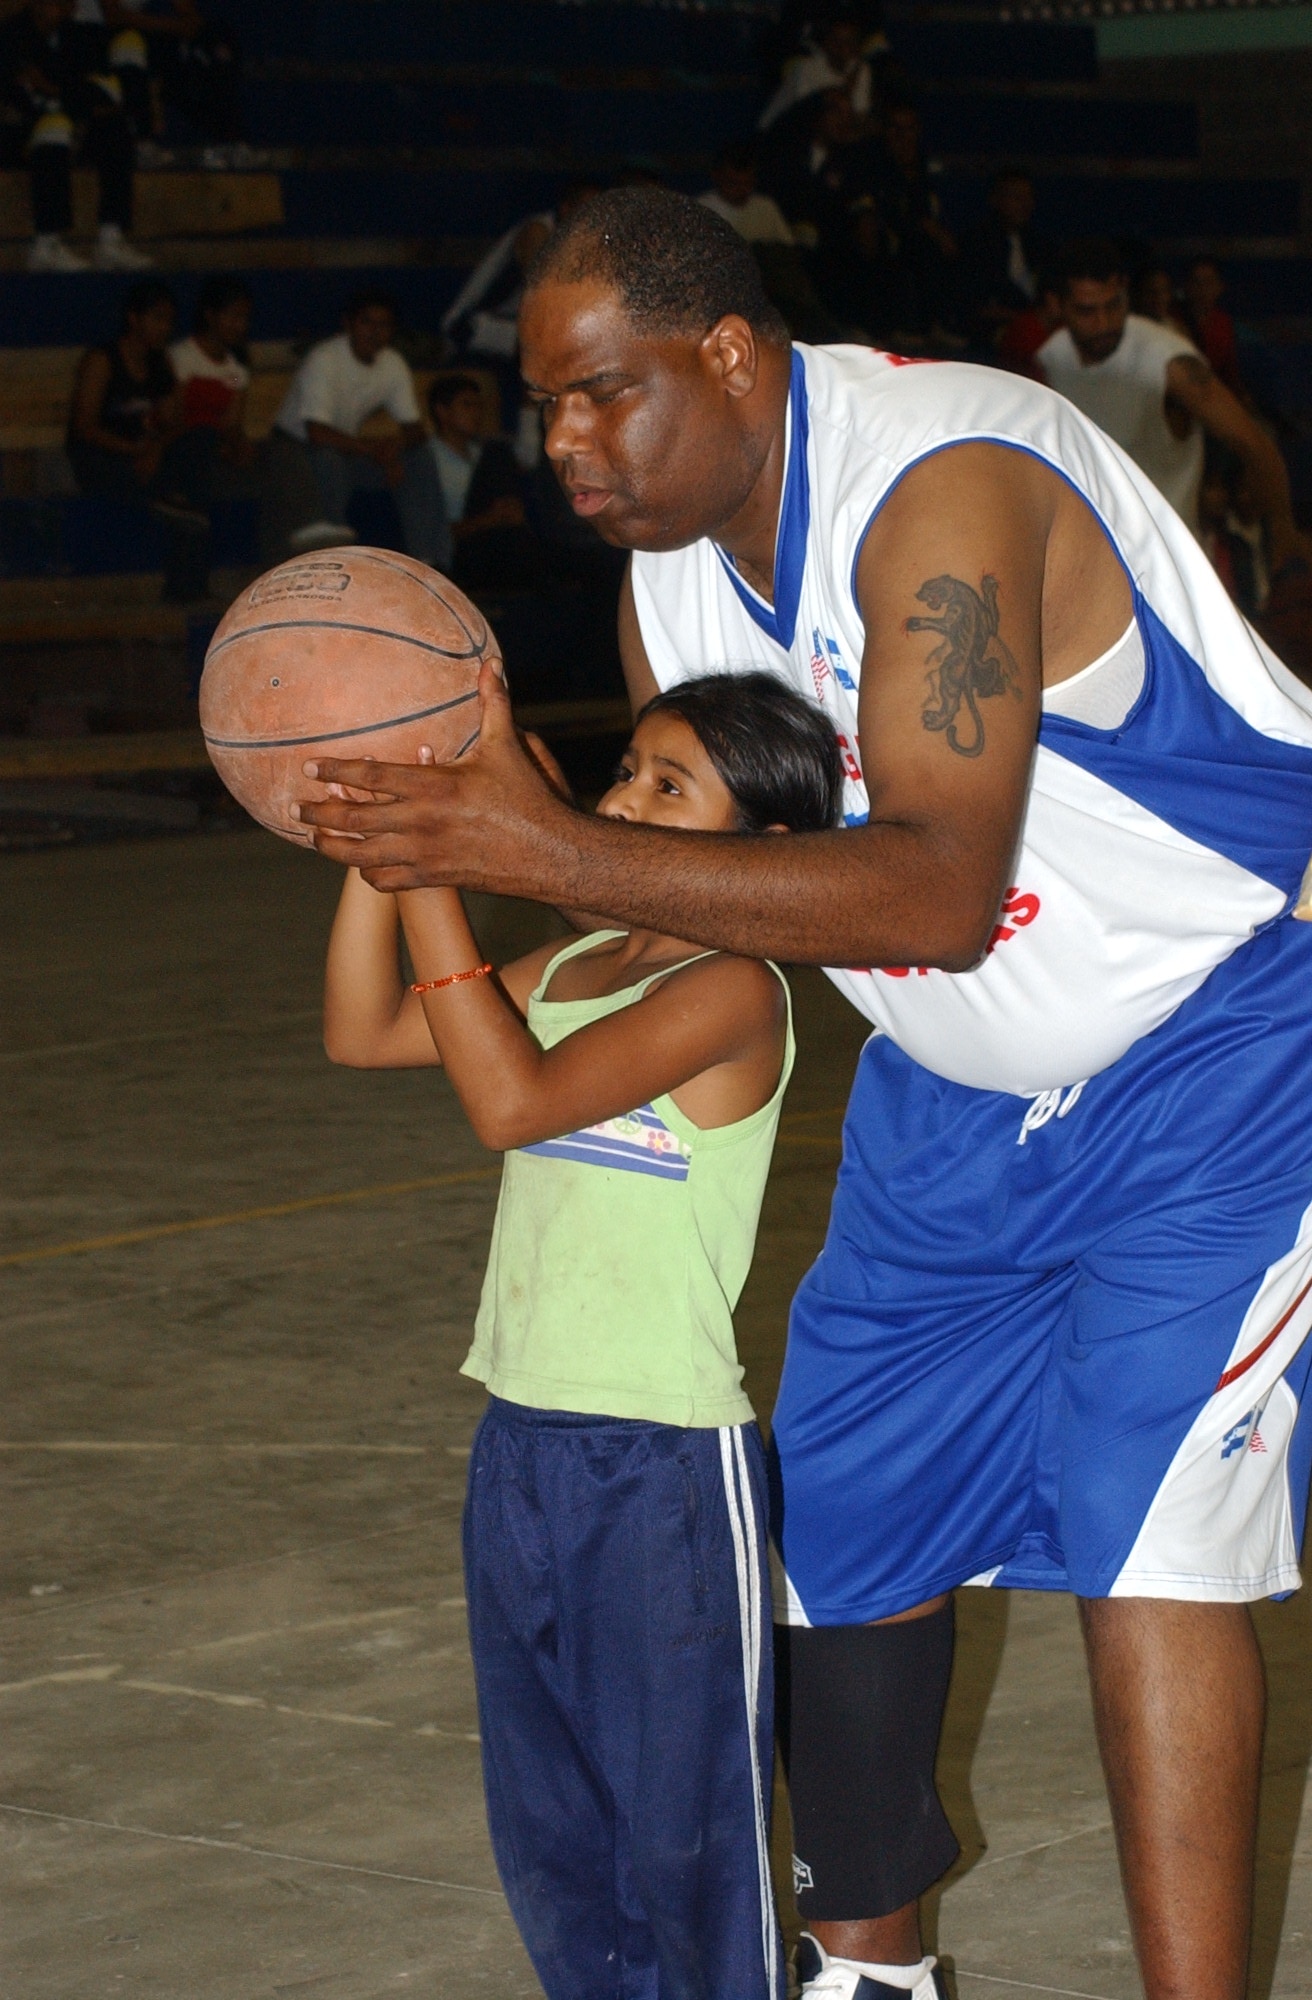 Army Sgt. Alonzo Lunsford, a member of the Soto Cano Air Base basketball team, the Comayagua Iguanas, shows the proper shooting technique to young Honduran girl June1 in Siguatepeque, Honduras. Sergeant Lunsford is a player and coach for the base team. The team receives invitations to travel and play local Honduran teams. Sgt. Lunsford says the games offer a key avenue to bridge the cultural gaps between Americans and Hondurans. U.S. Air Force photo by Senior Airman Shaun Emery.